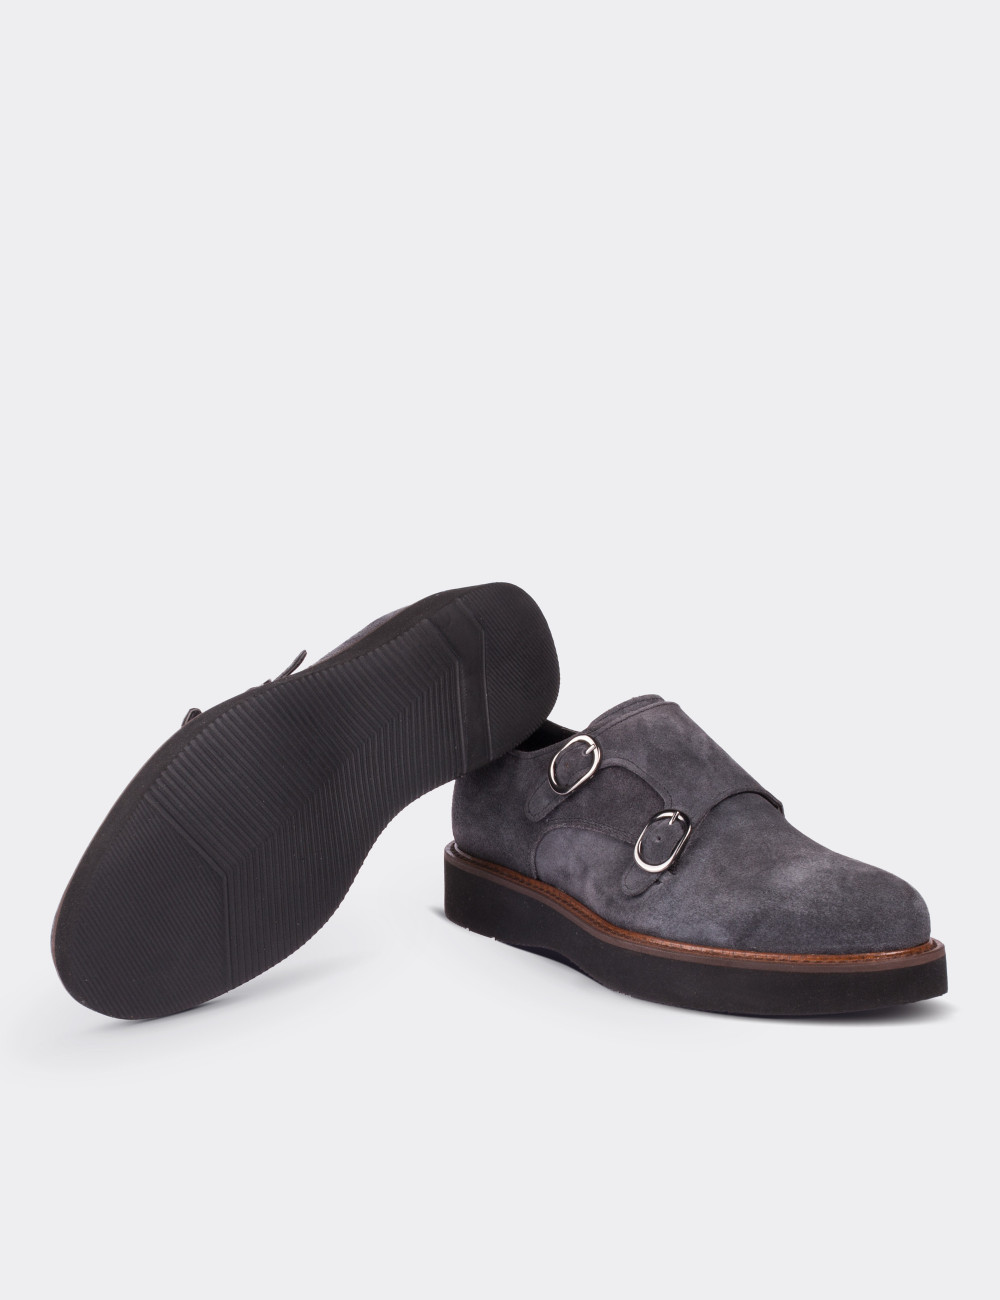 Gray Suede Leather Monk Straps - 01614ZGRIE01